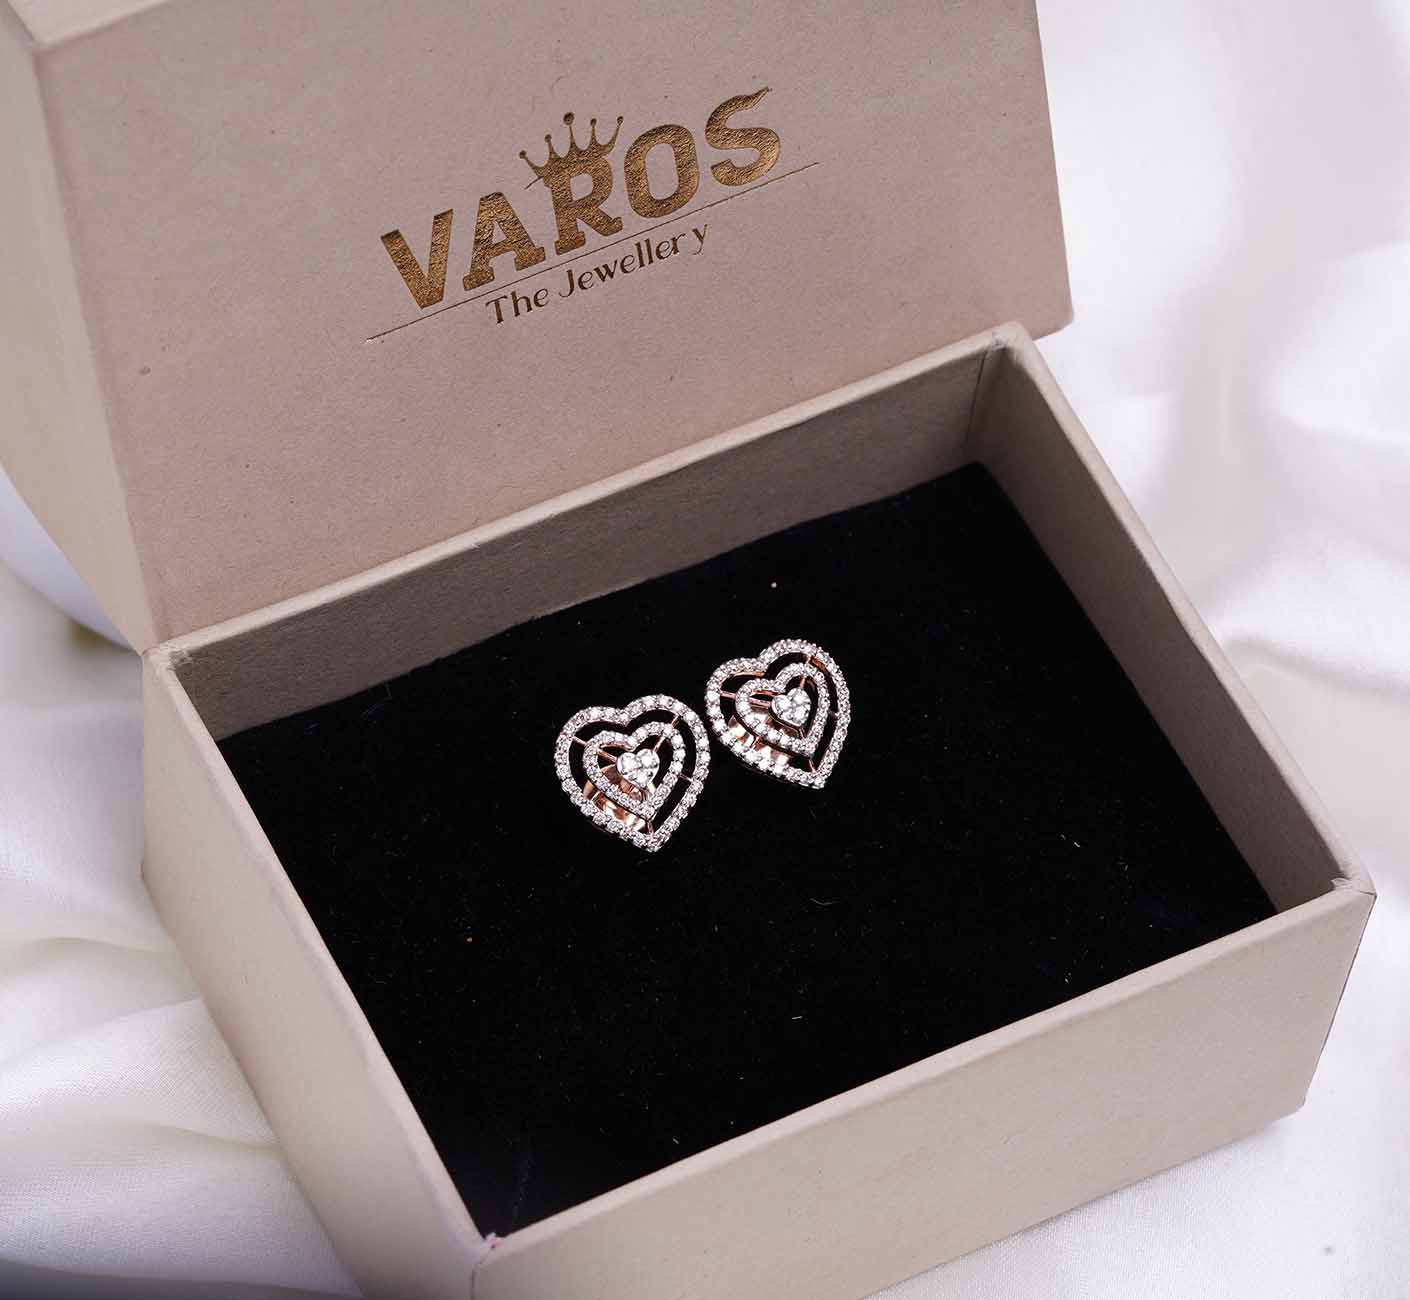 about-brand-varos-the-jewellery